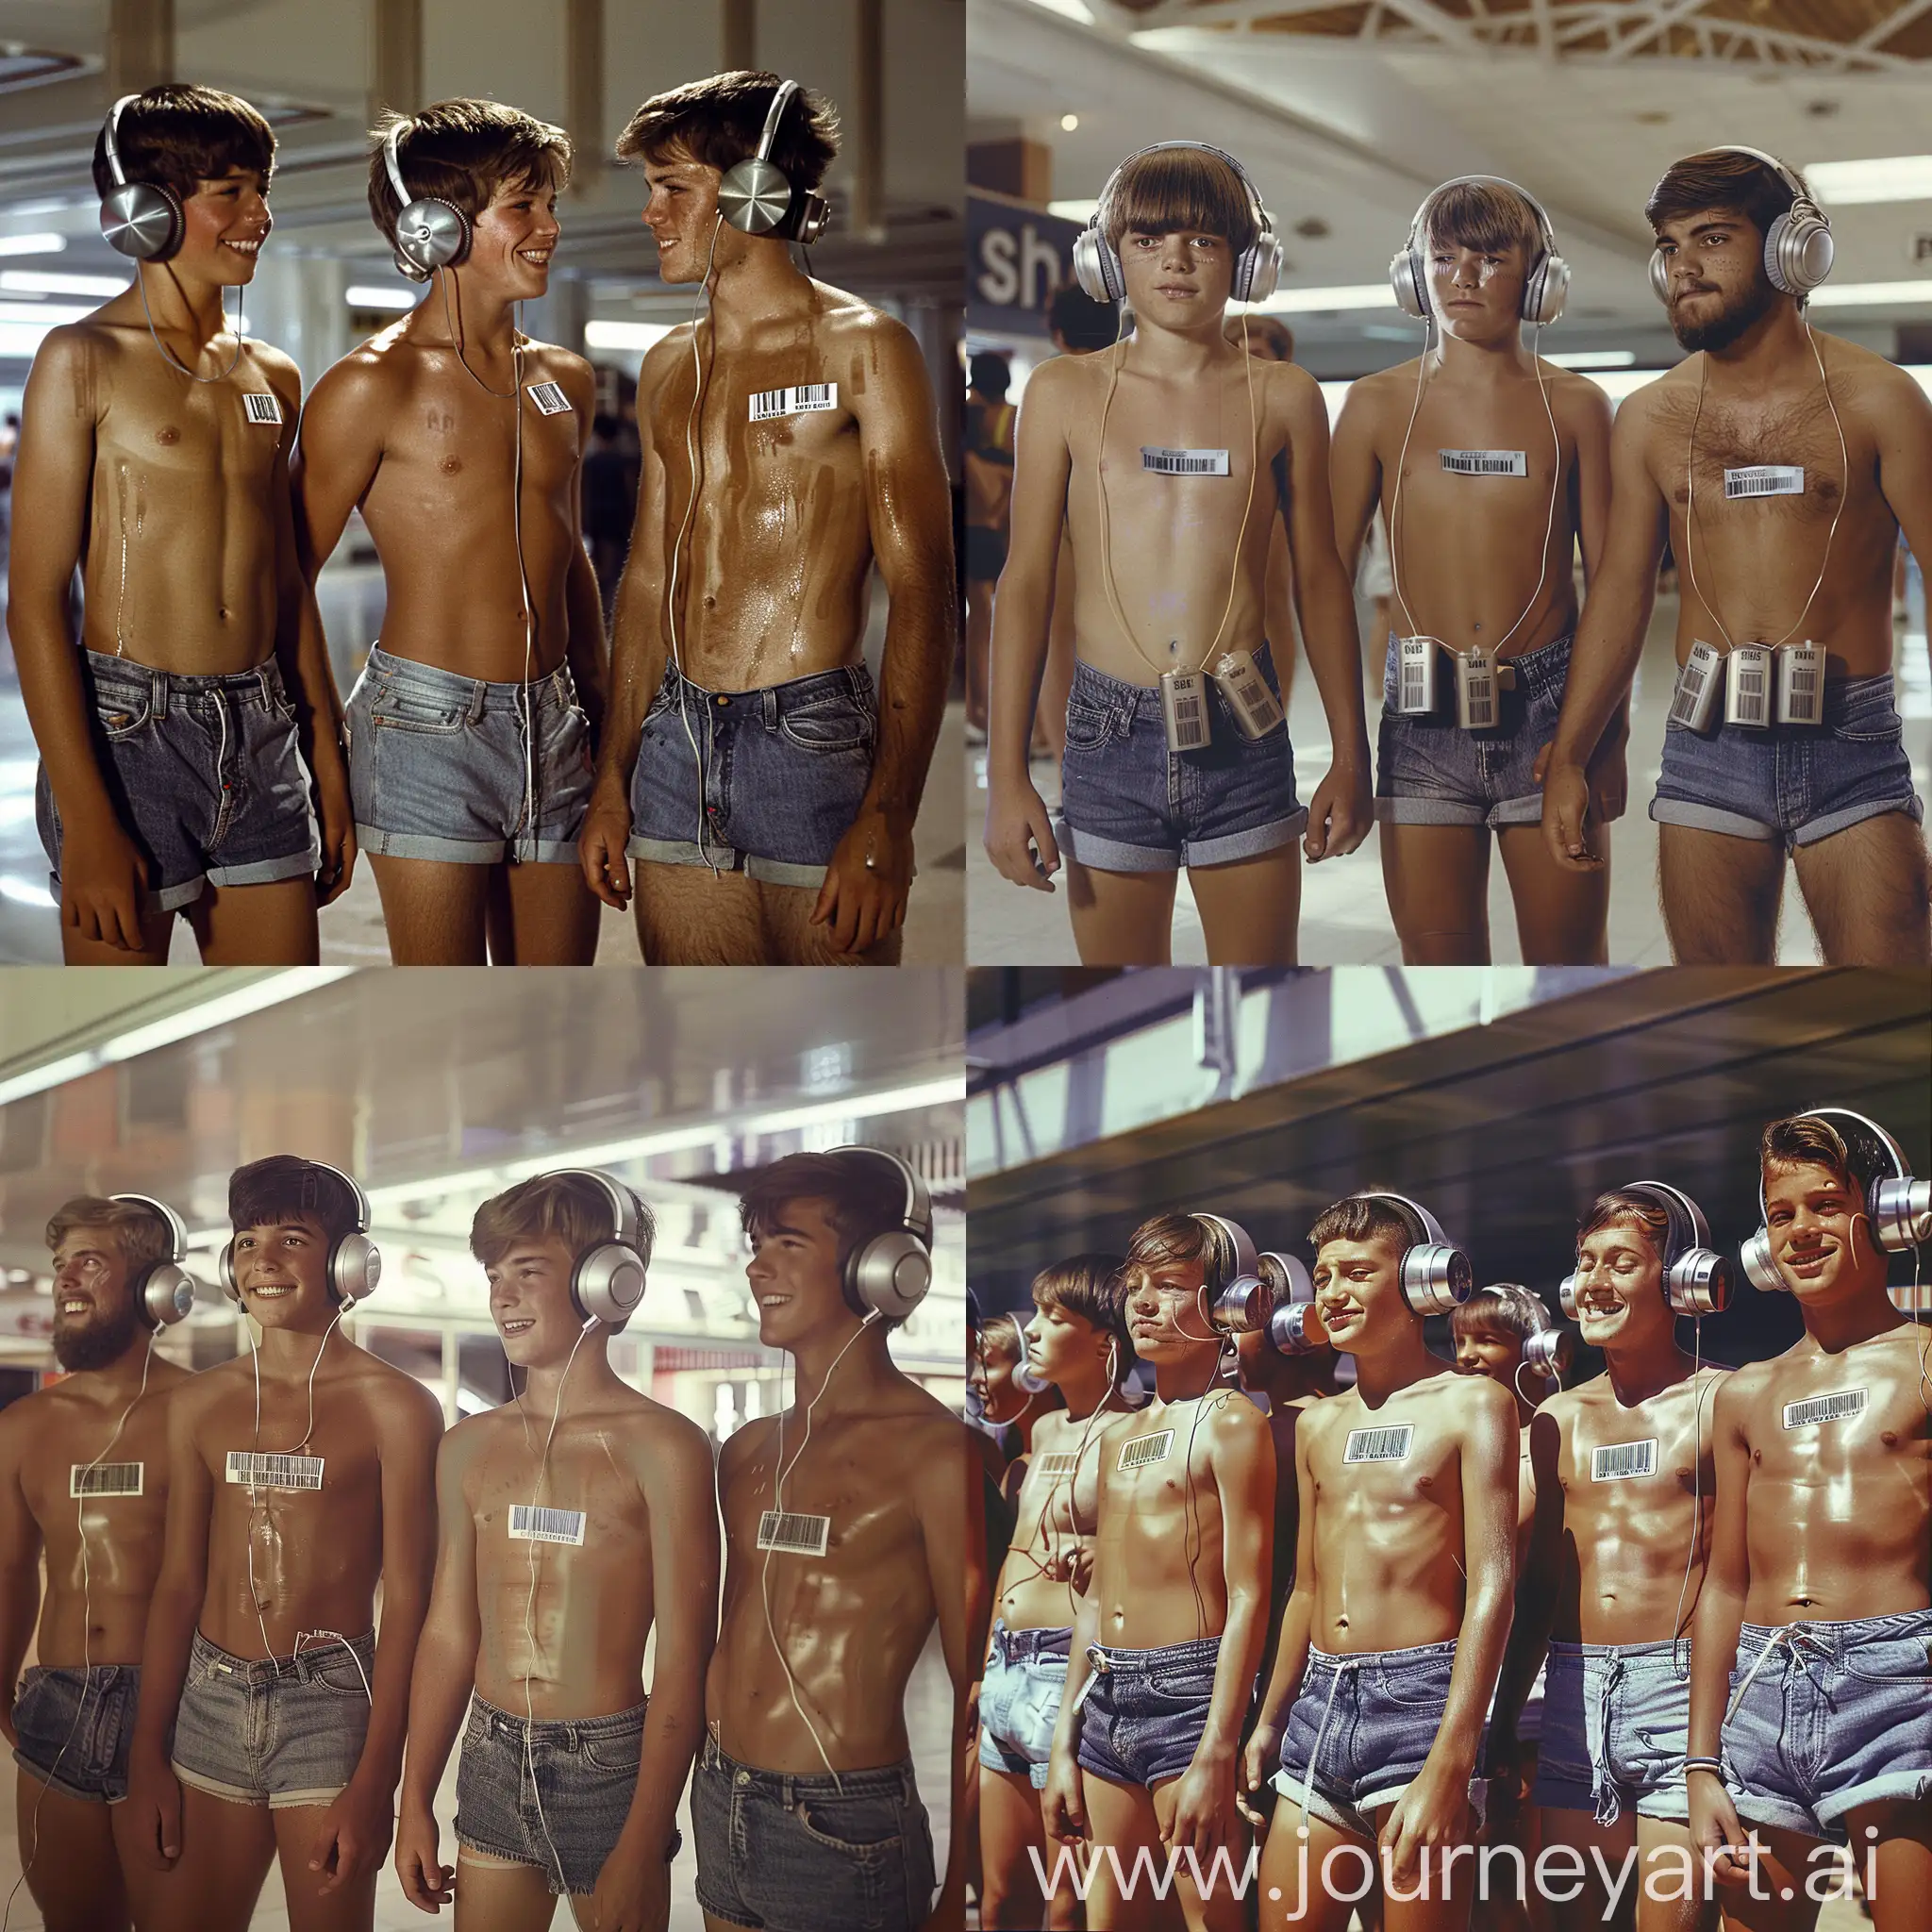 Handsome muscular teenage boys and handsome muscular middle-aged men each wear silver headphones and fitted cutoff denim shorts, dazed smiles, small barcode attached to each man's chest, 1960s shopping mall setting, facial hair, facing the viewer, mass indoctrination, color image, hyperrealistic, cinematic